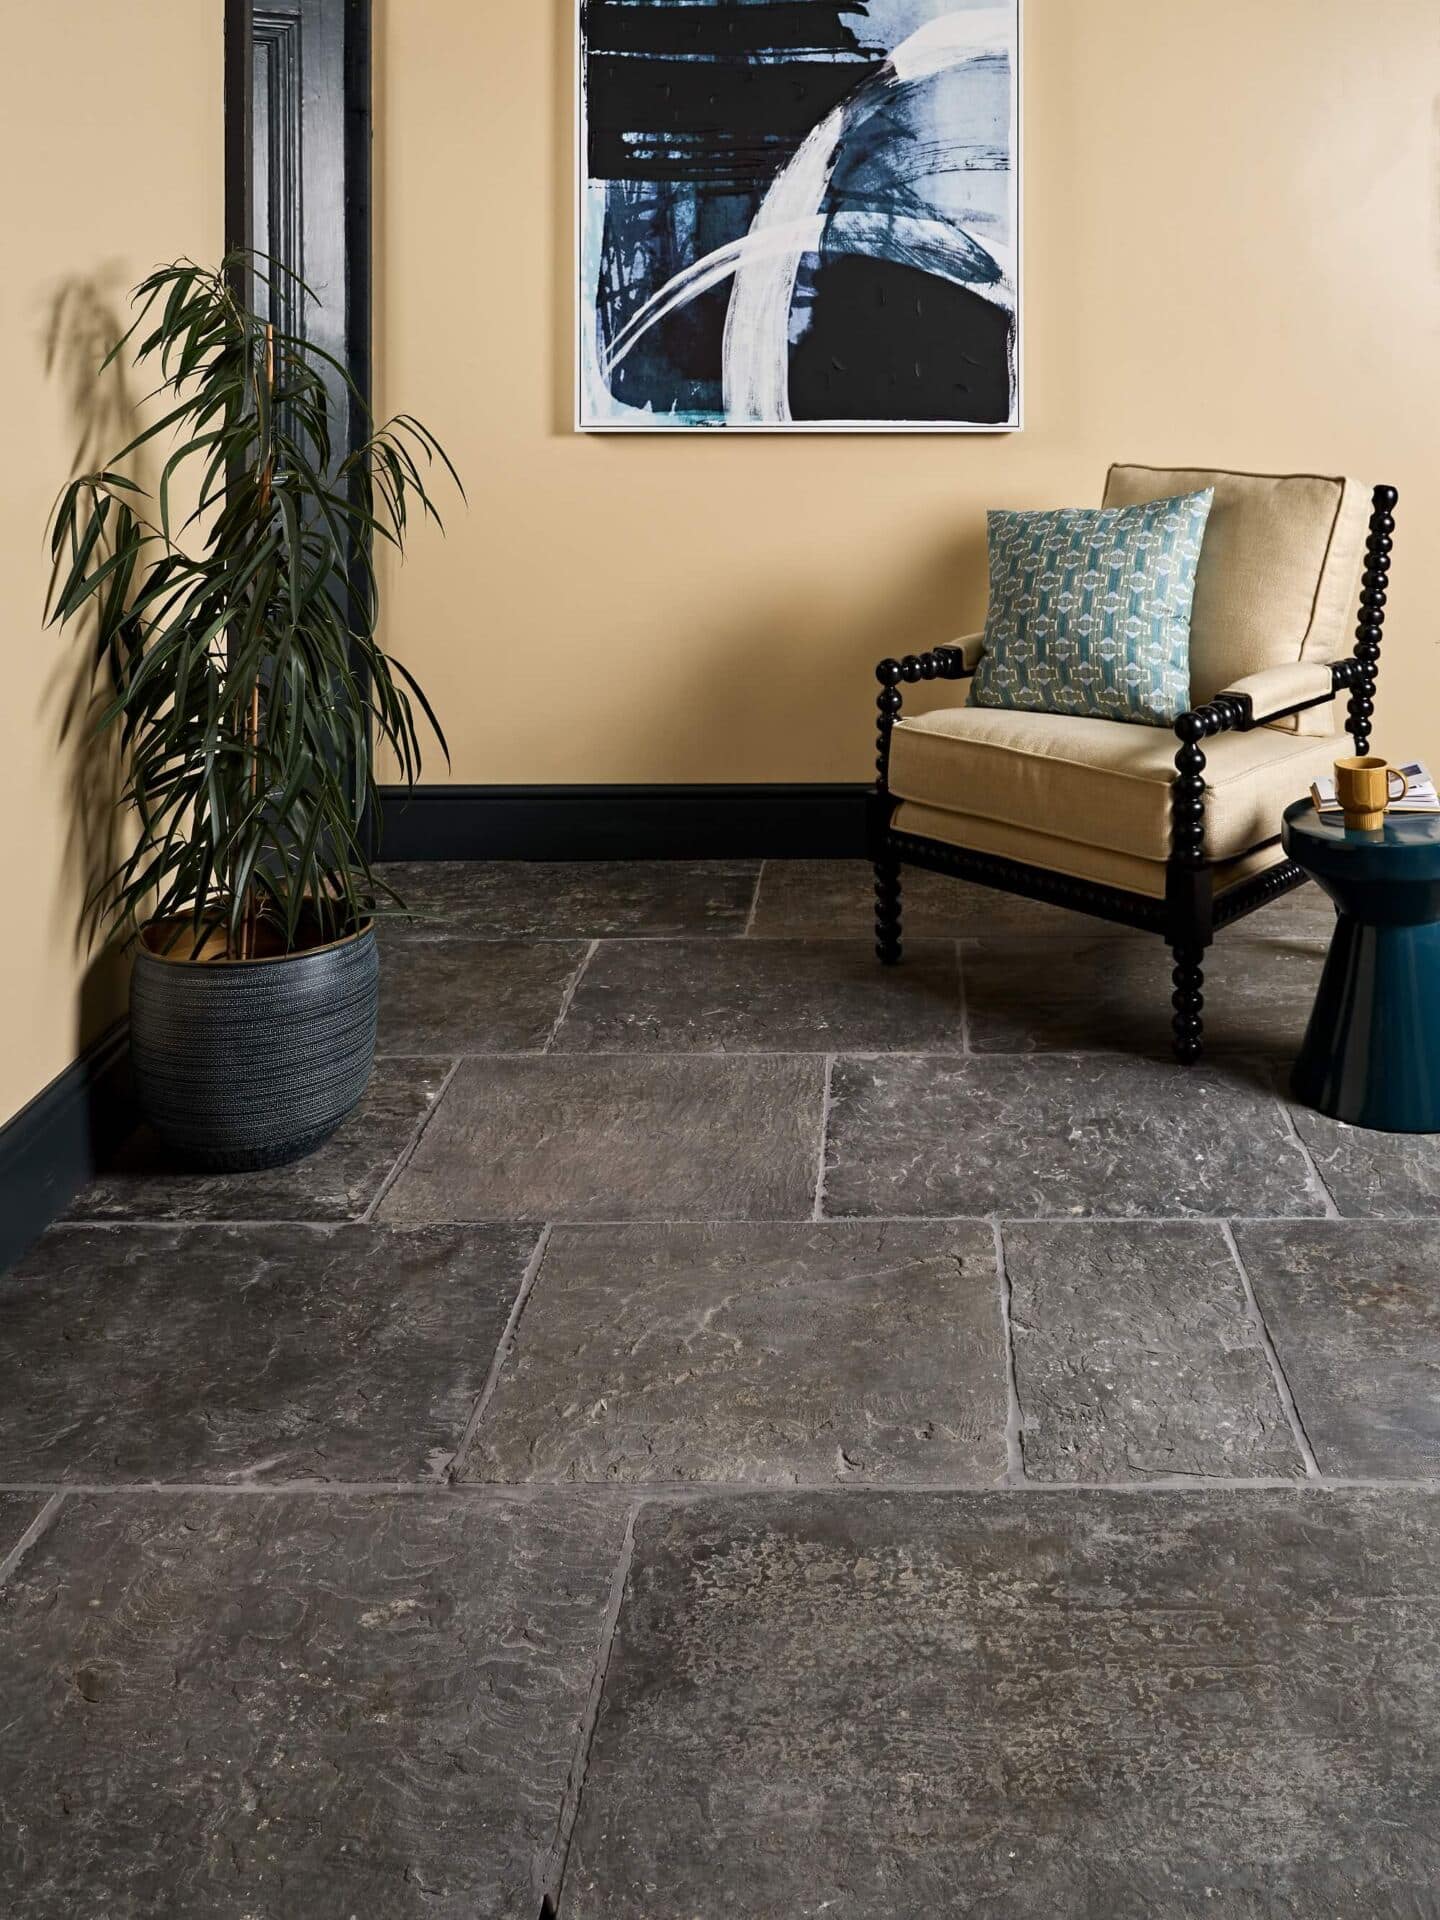 An entryway with dark limestone floor tiles, yellow walls featuring an abstract piece of framed art and a plant